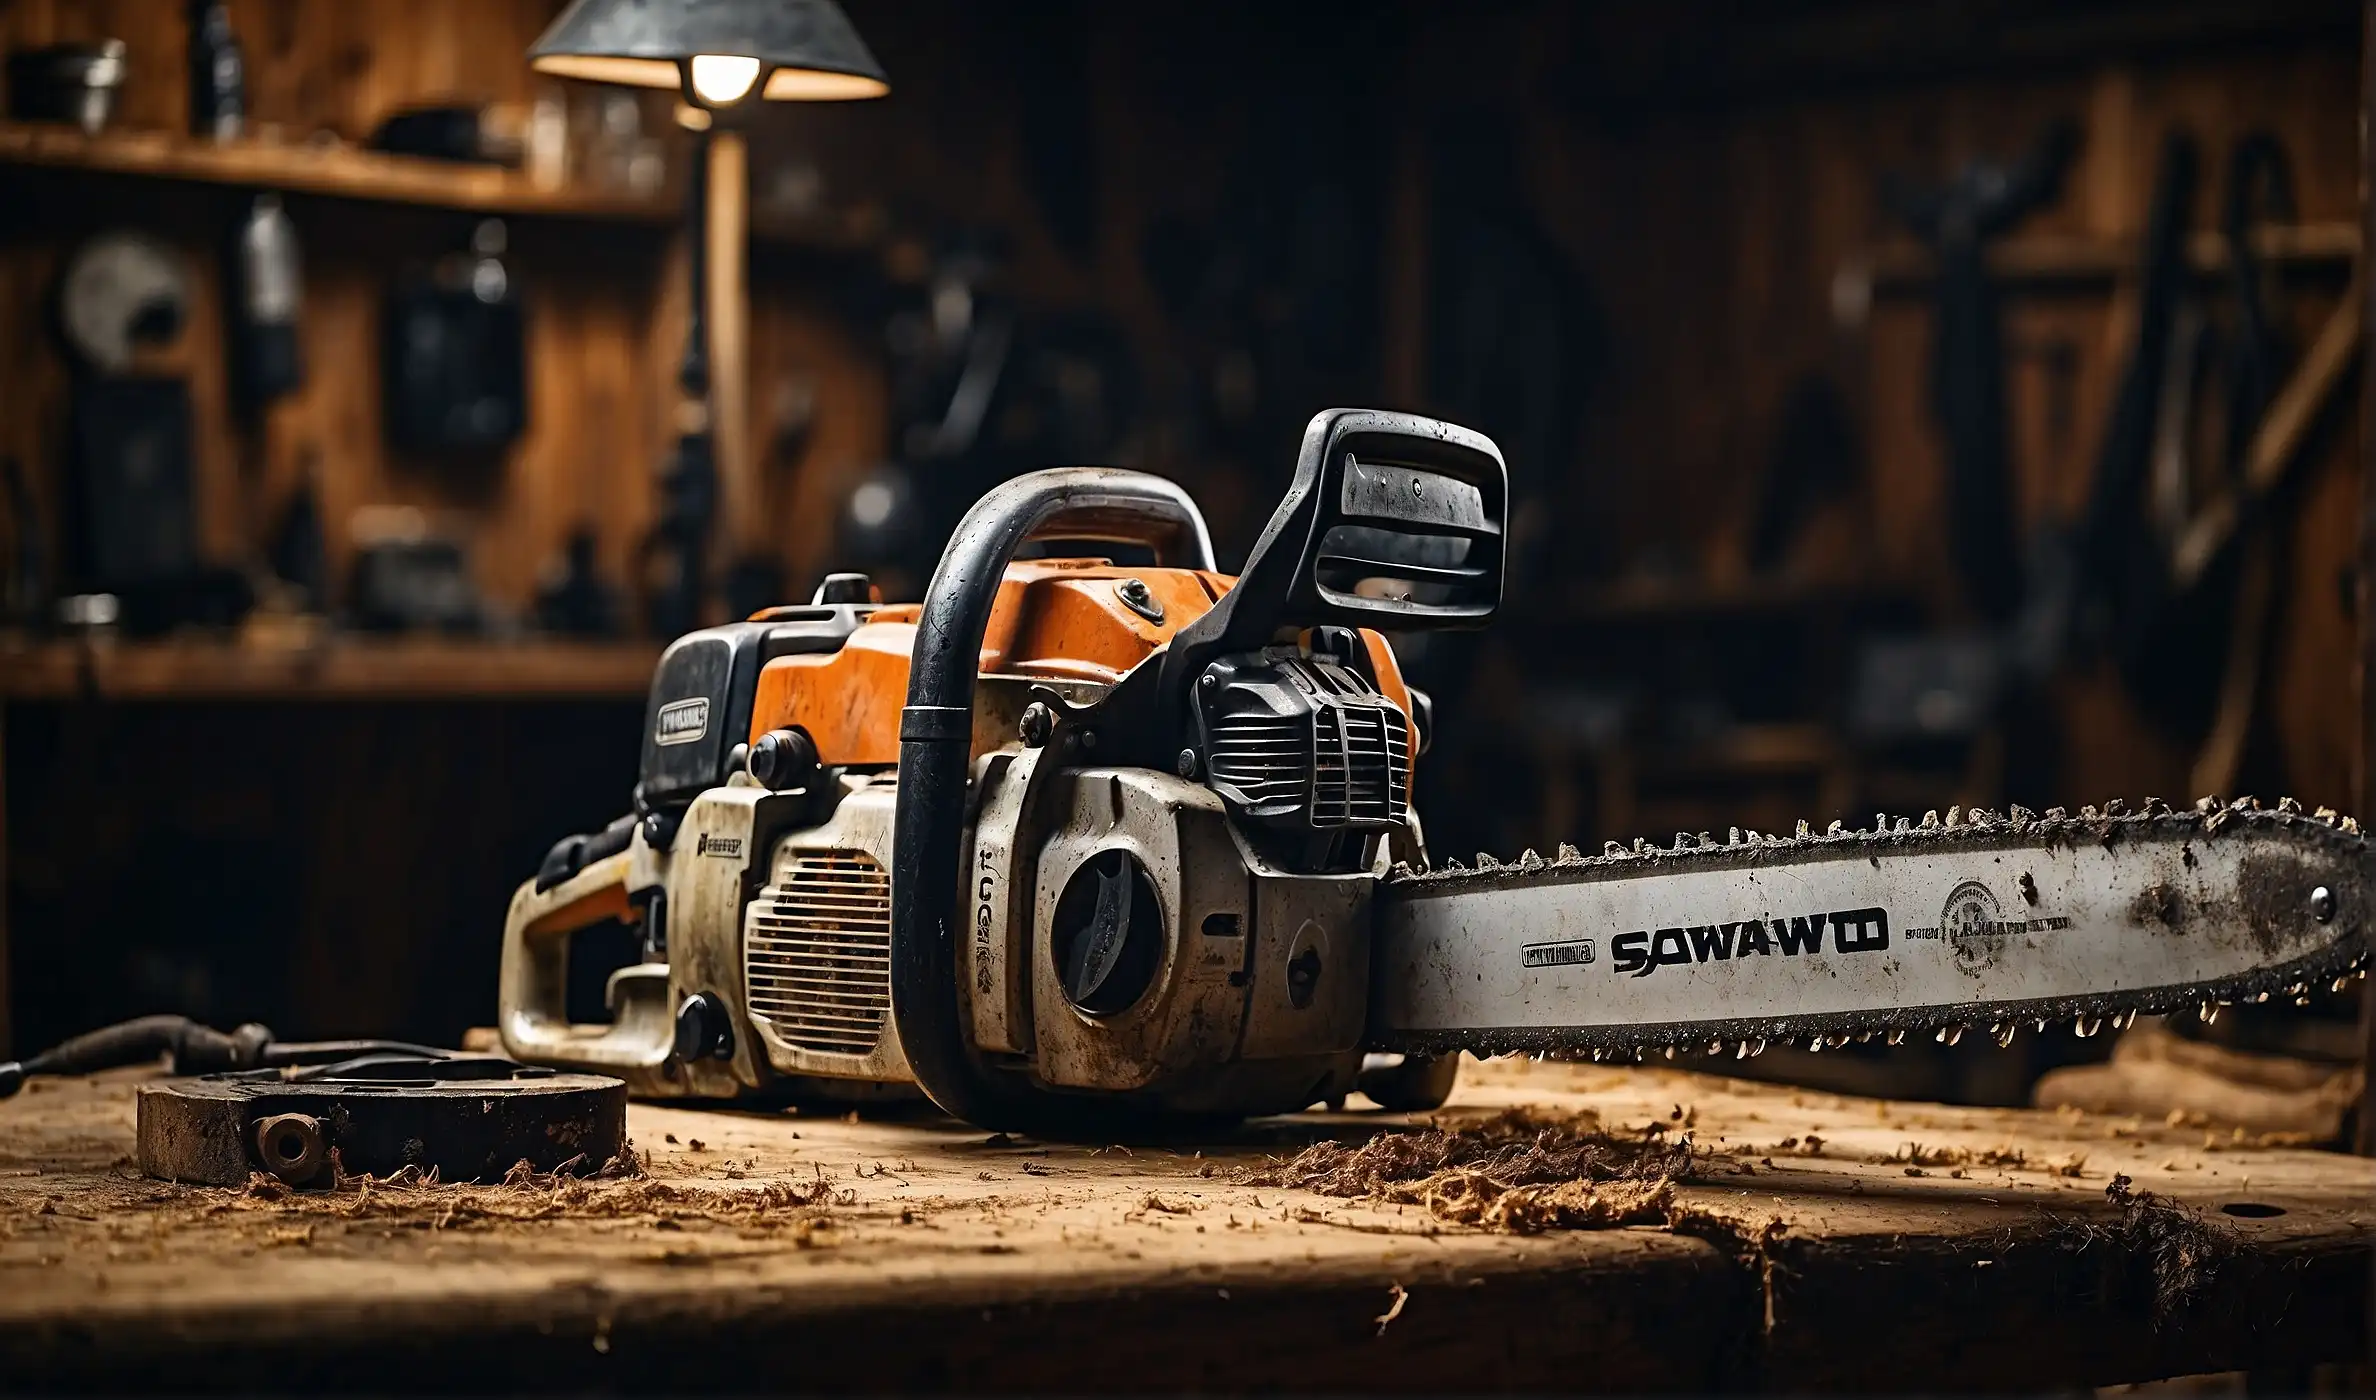 A chainsaw with 10w30 oil on its bar